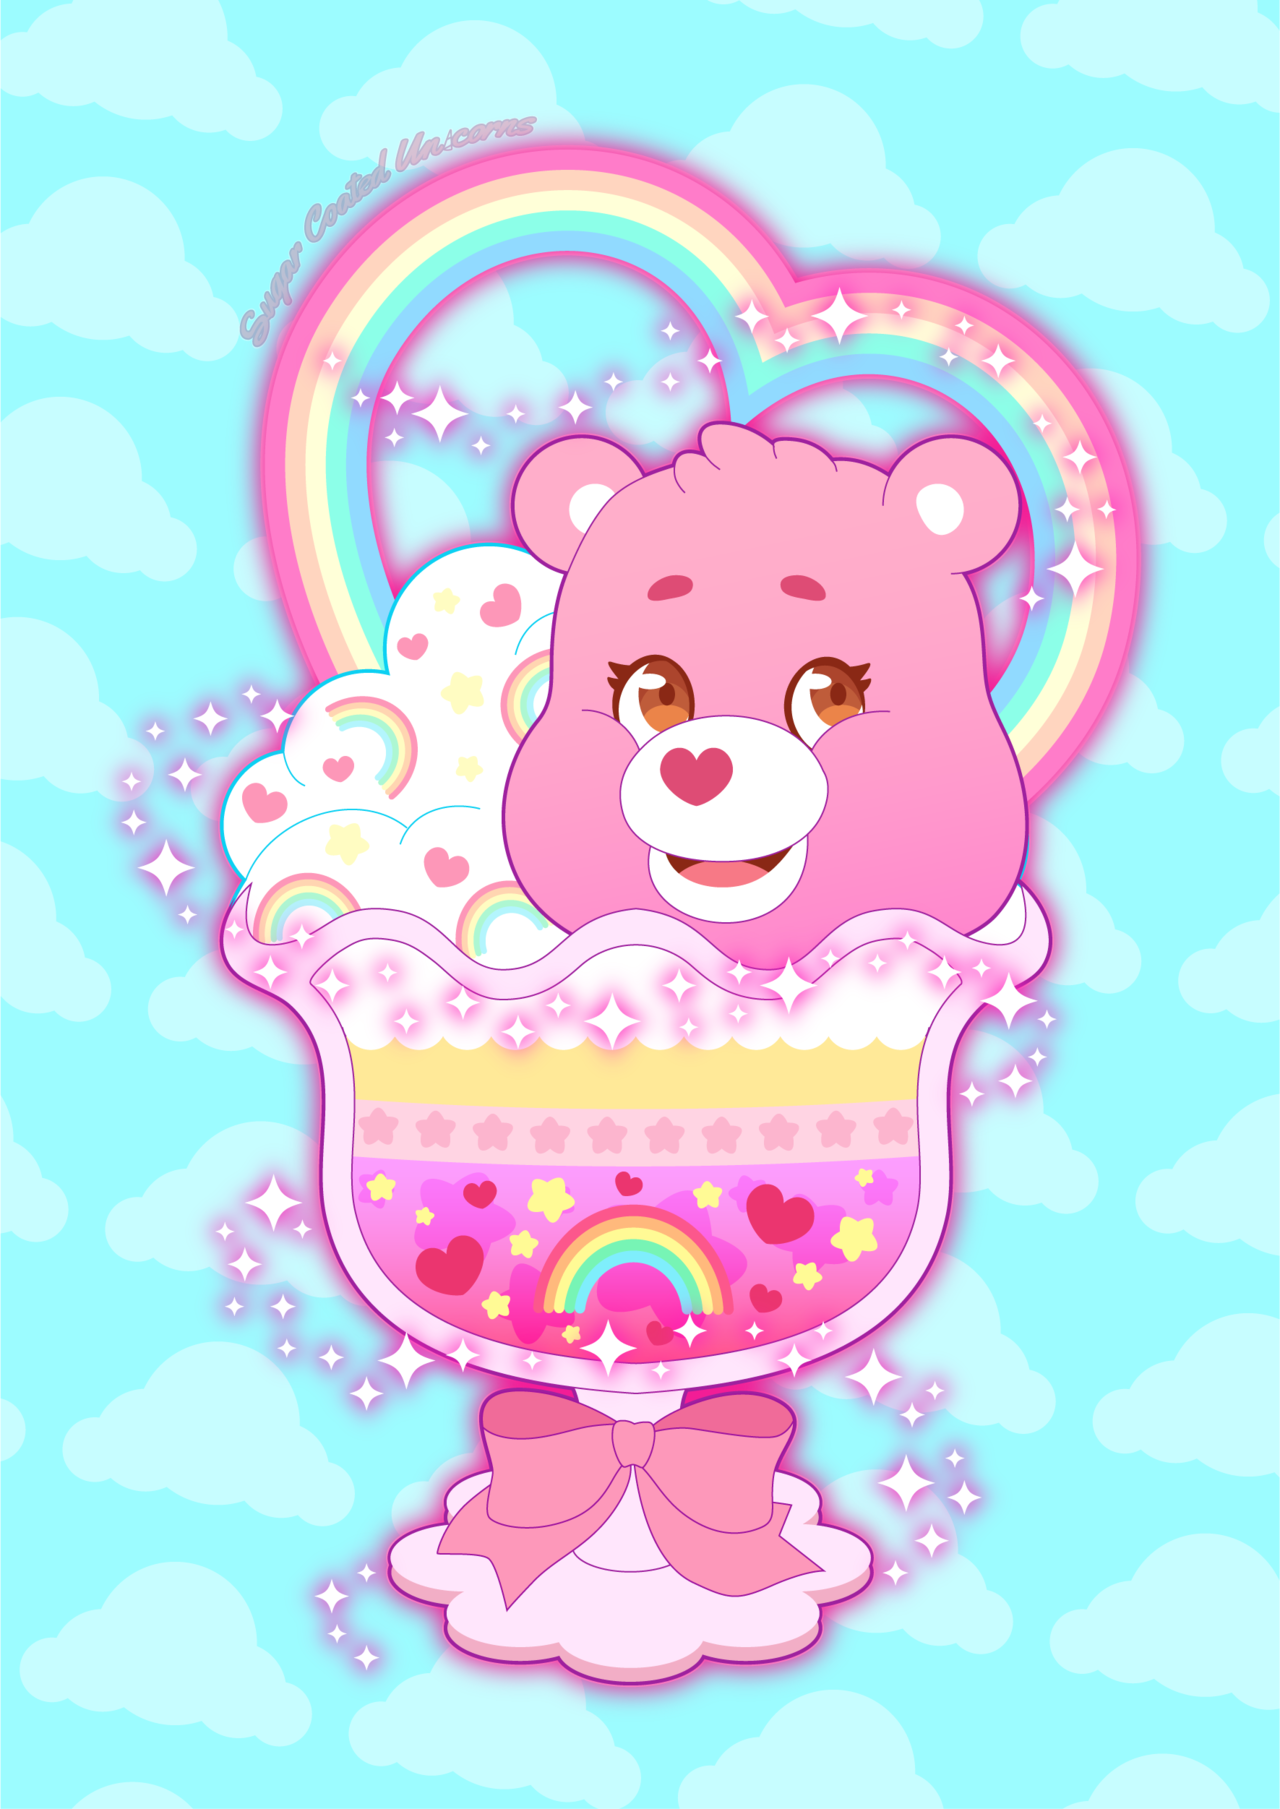 care bears to care a lot Tumblr